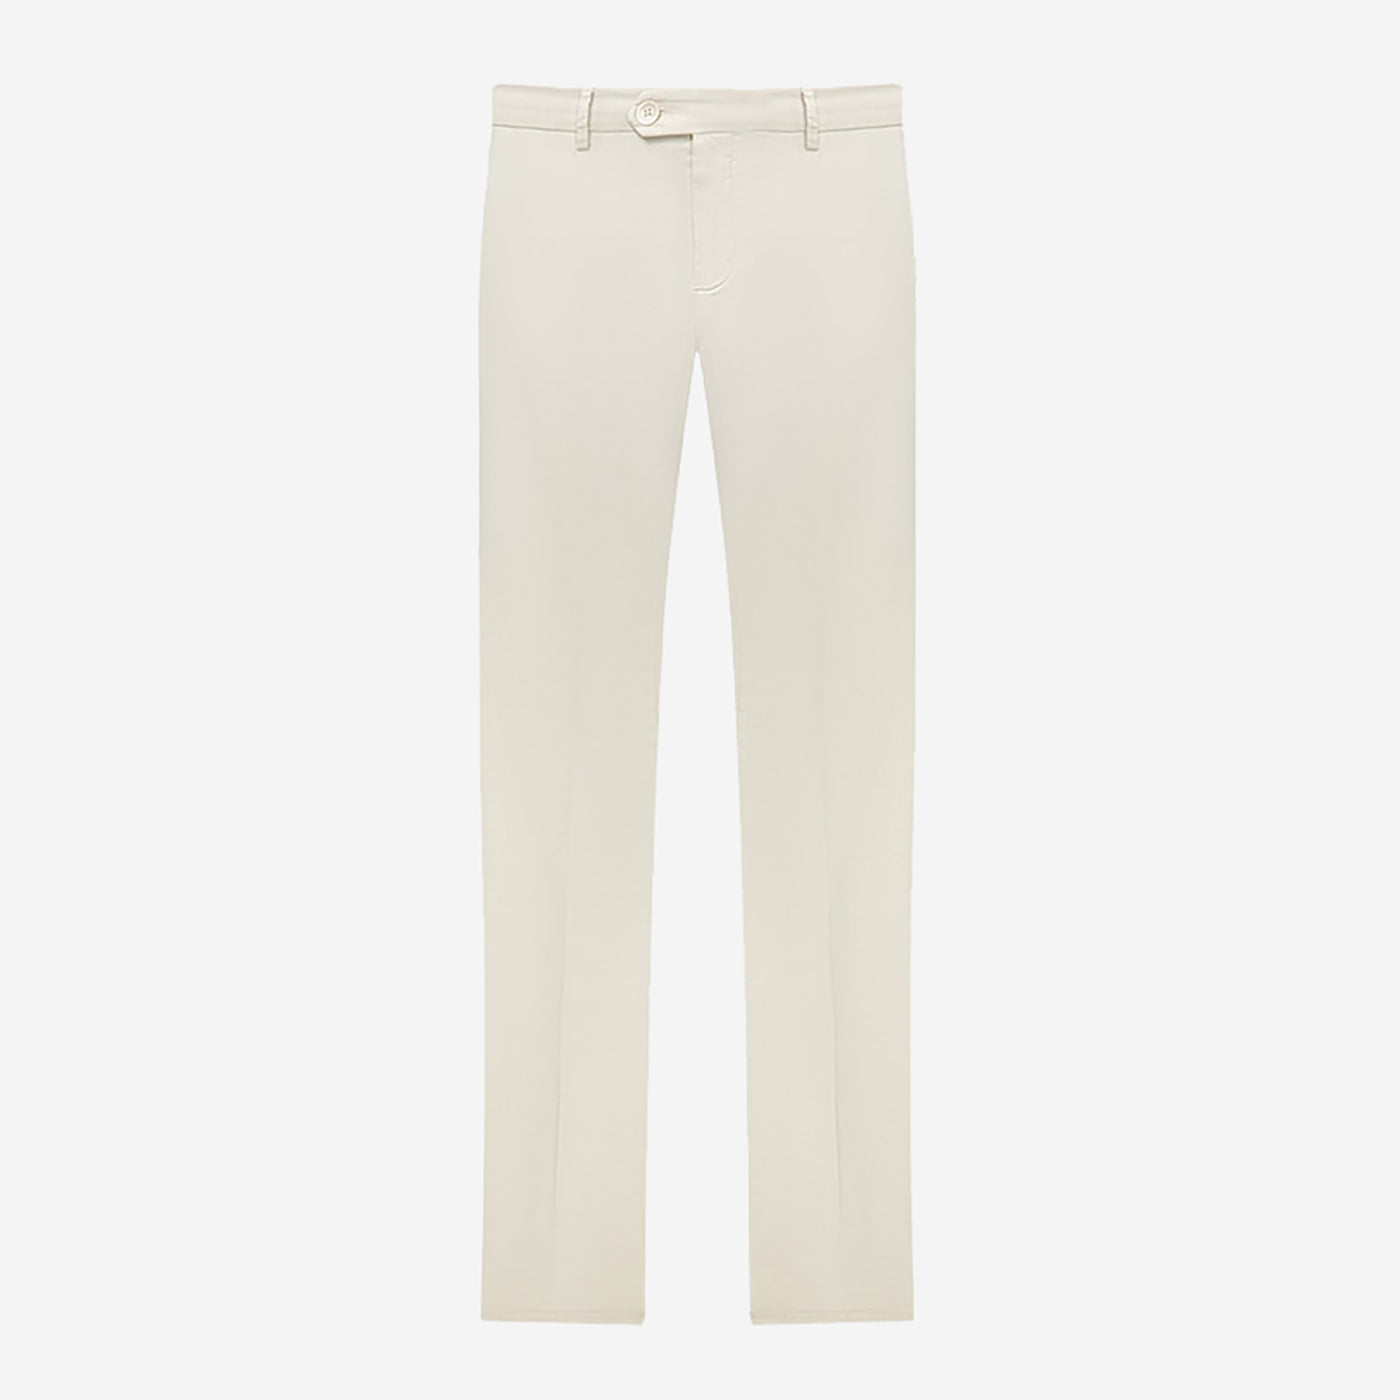 Brunello Cucinelli Garment Dyed Italian Fit Trousers